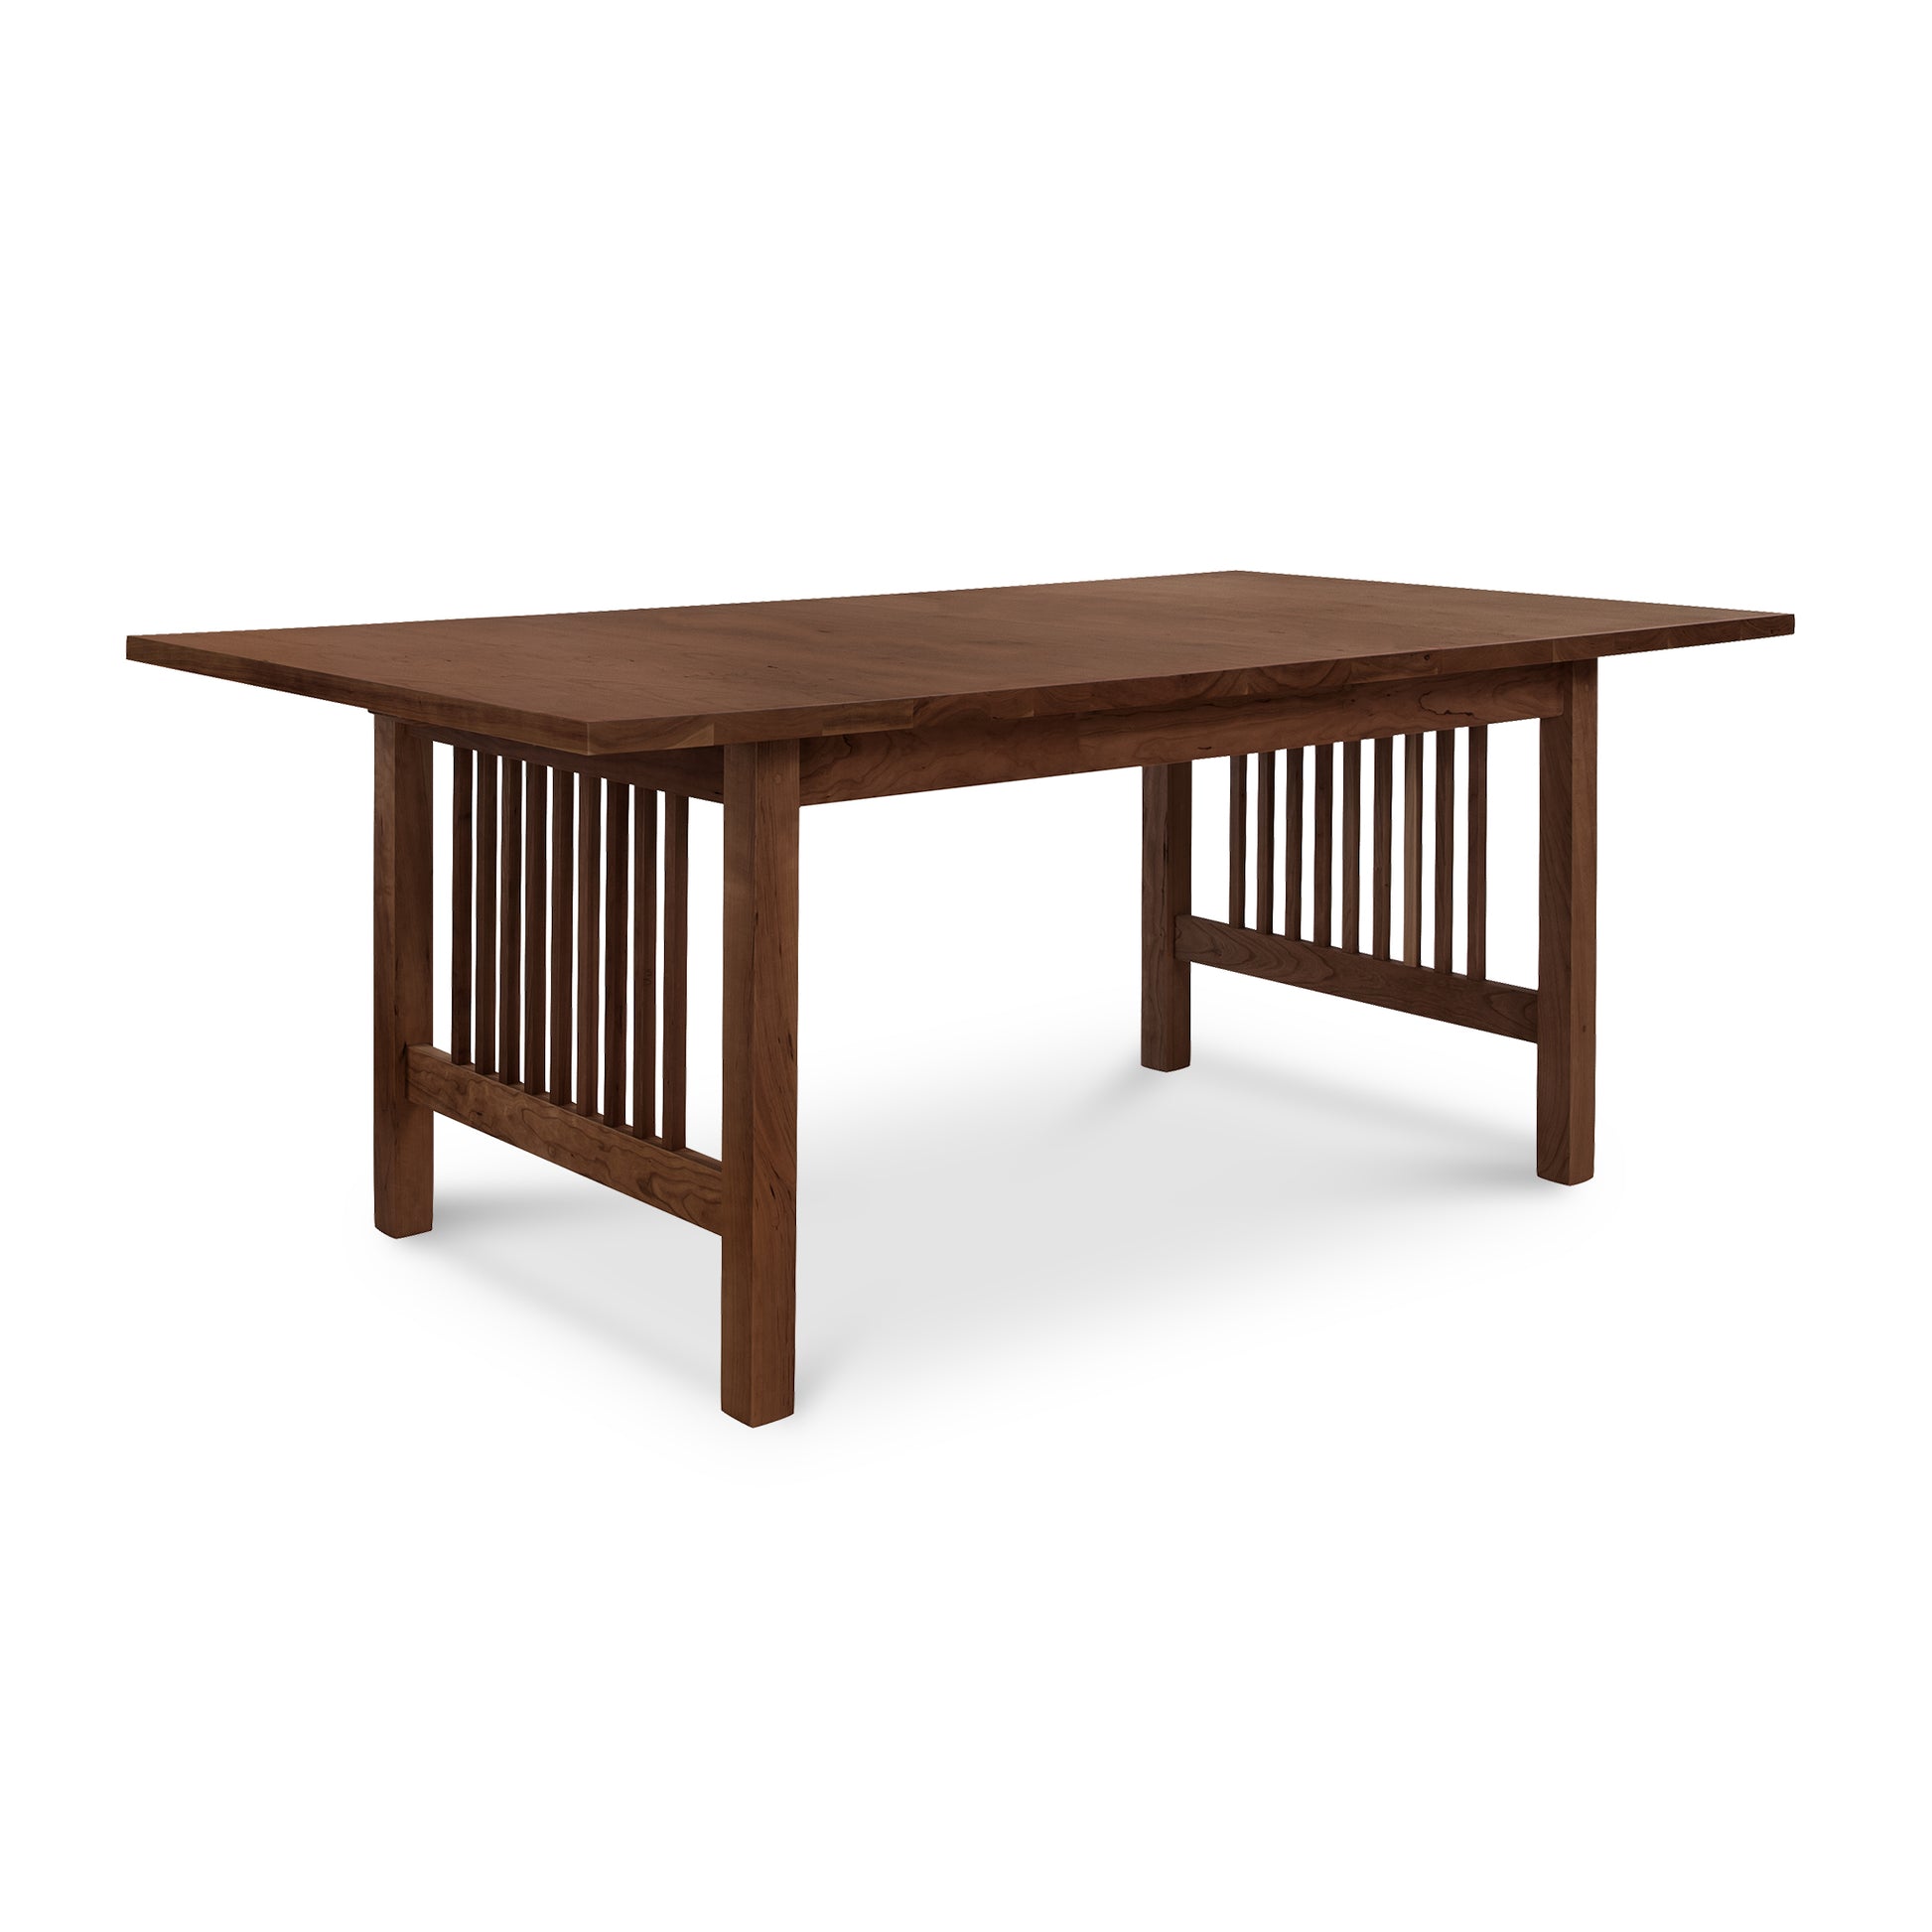 The Lyndon Furniture American Mission Solid Top Dining Table features a traditional design with a wooden top and legs, ensuring solid construction.